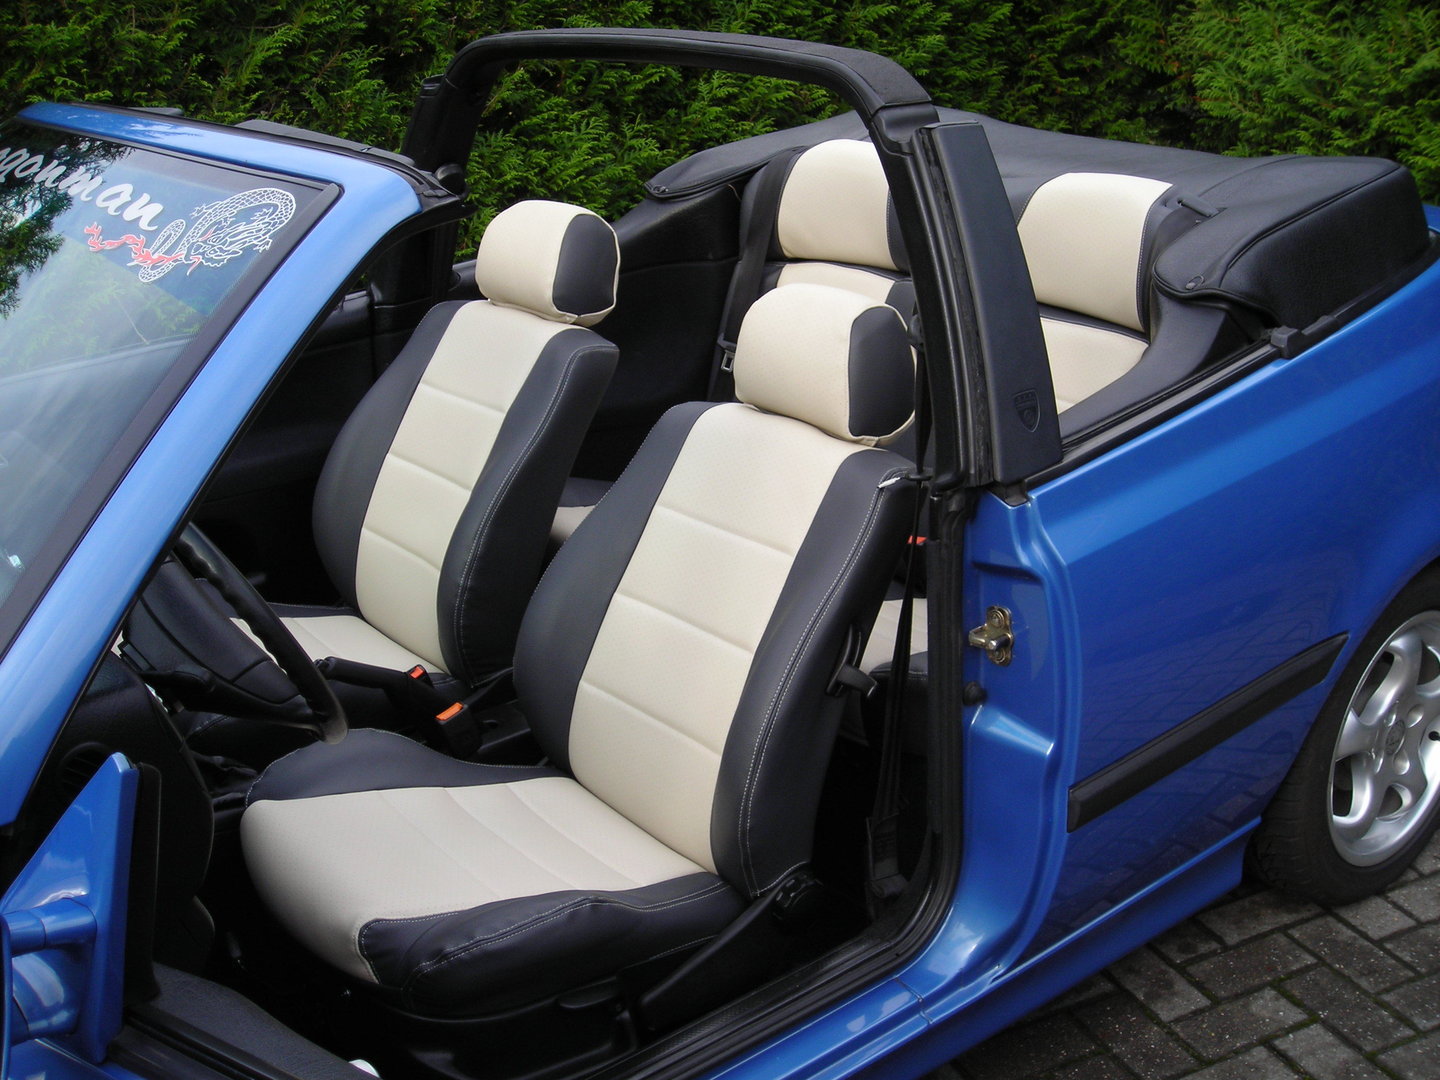 Golf mk3 cabriolet artificial leather seat covers in black, black/beige, black/grey and beige